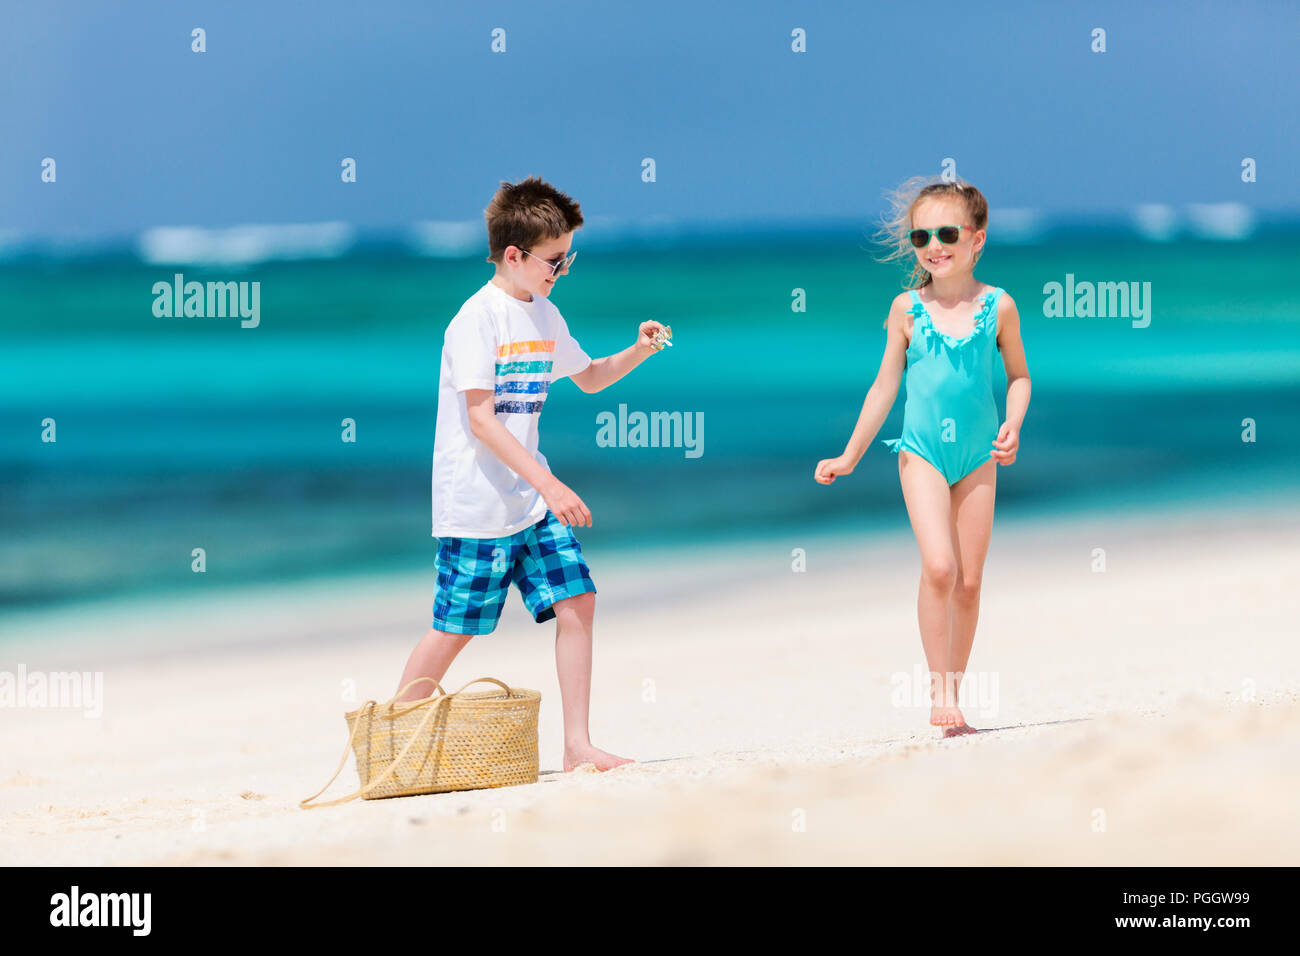 Kids having fun at tropical beach during tropical summer vacation playing together at beach Stock Photo